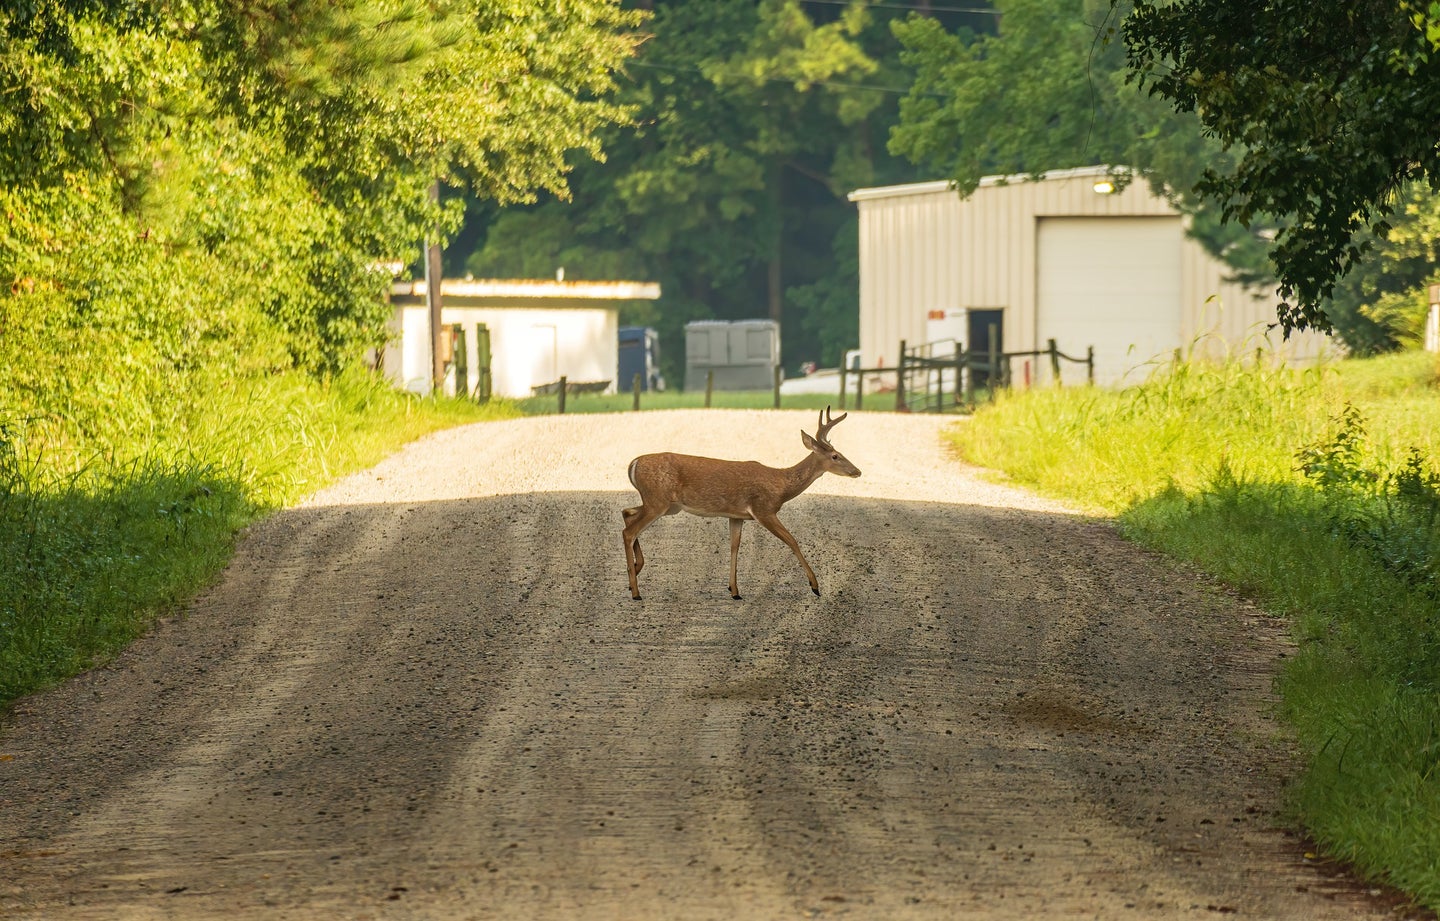 Whitetail deer buck crossing a dirt road in front of a barn.